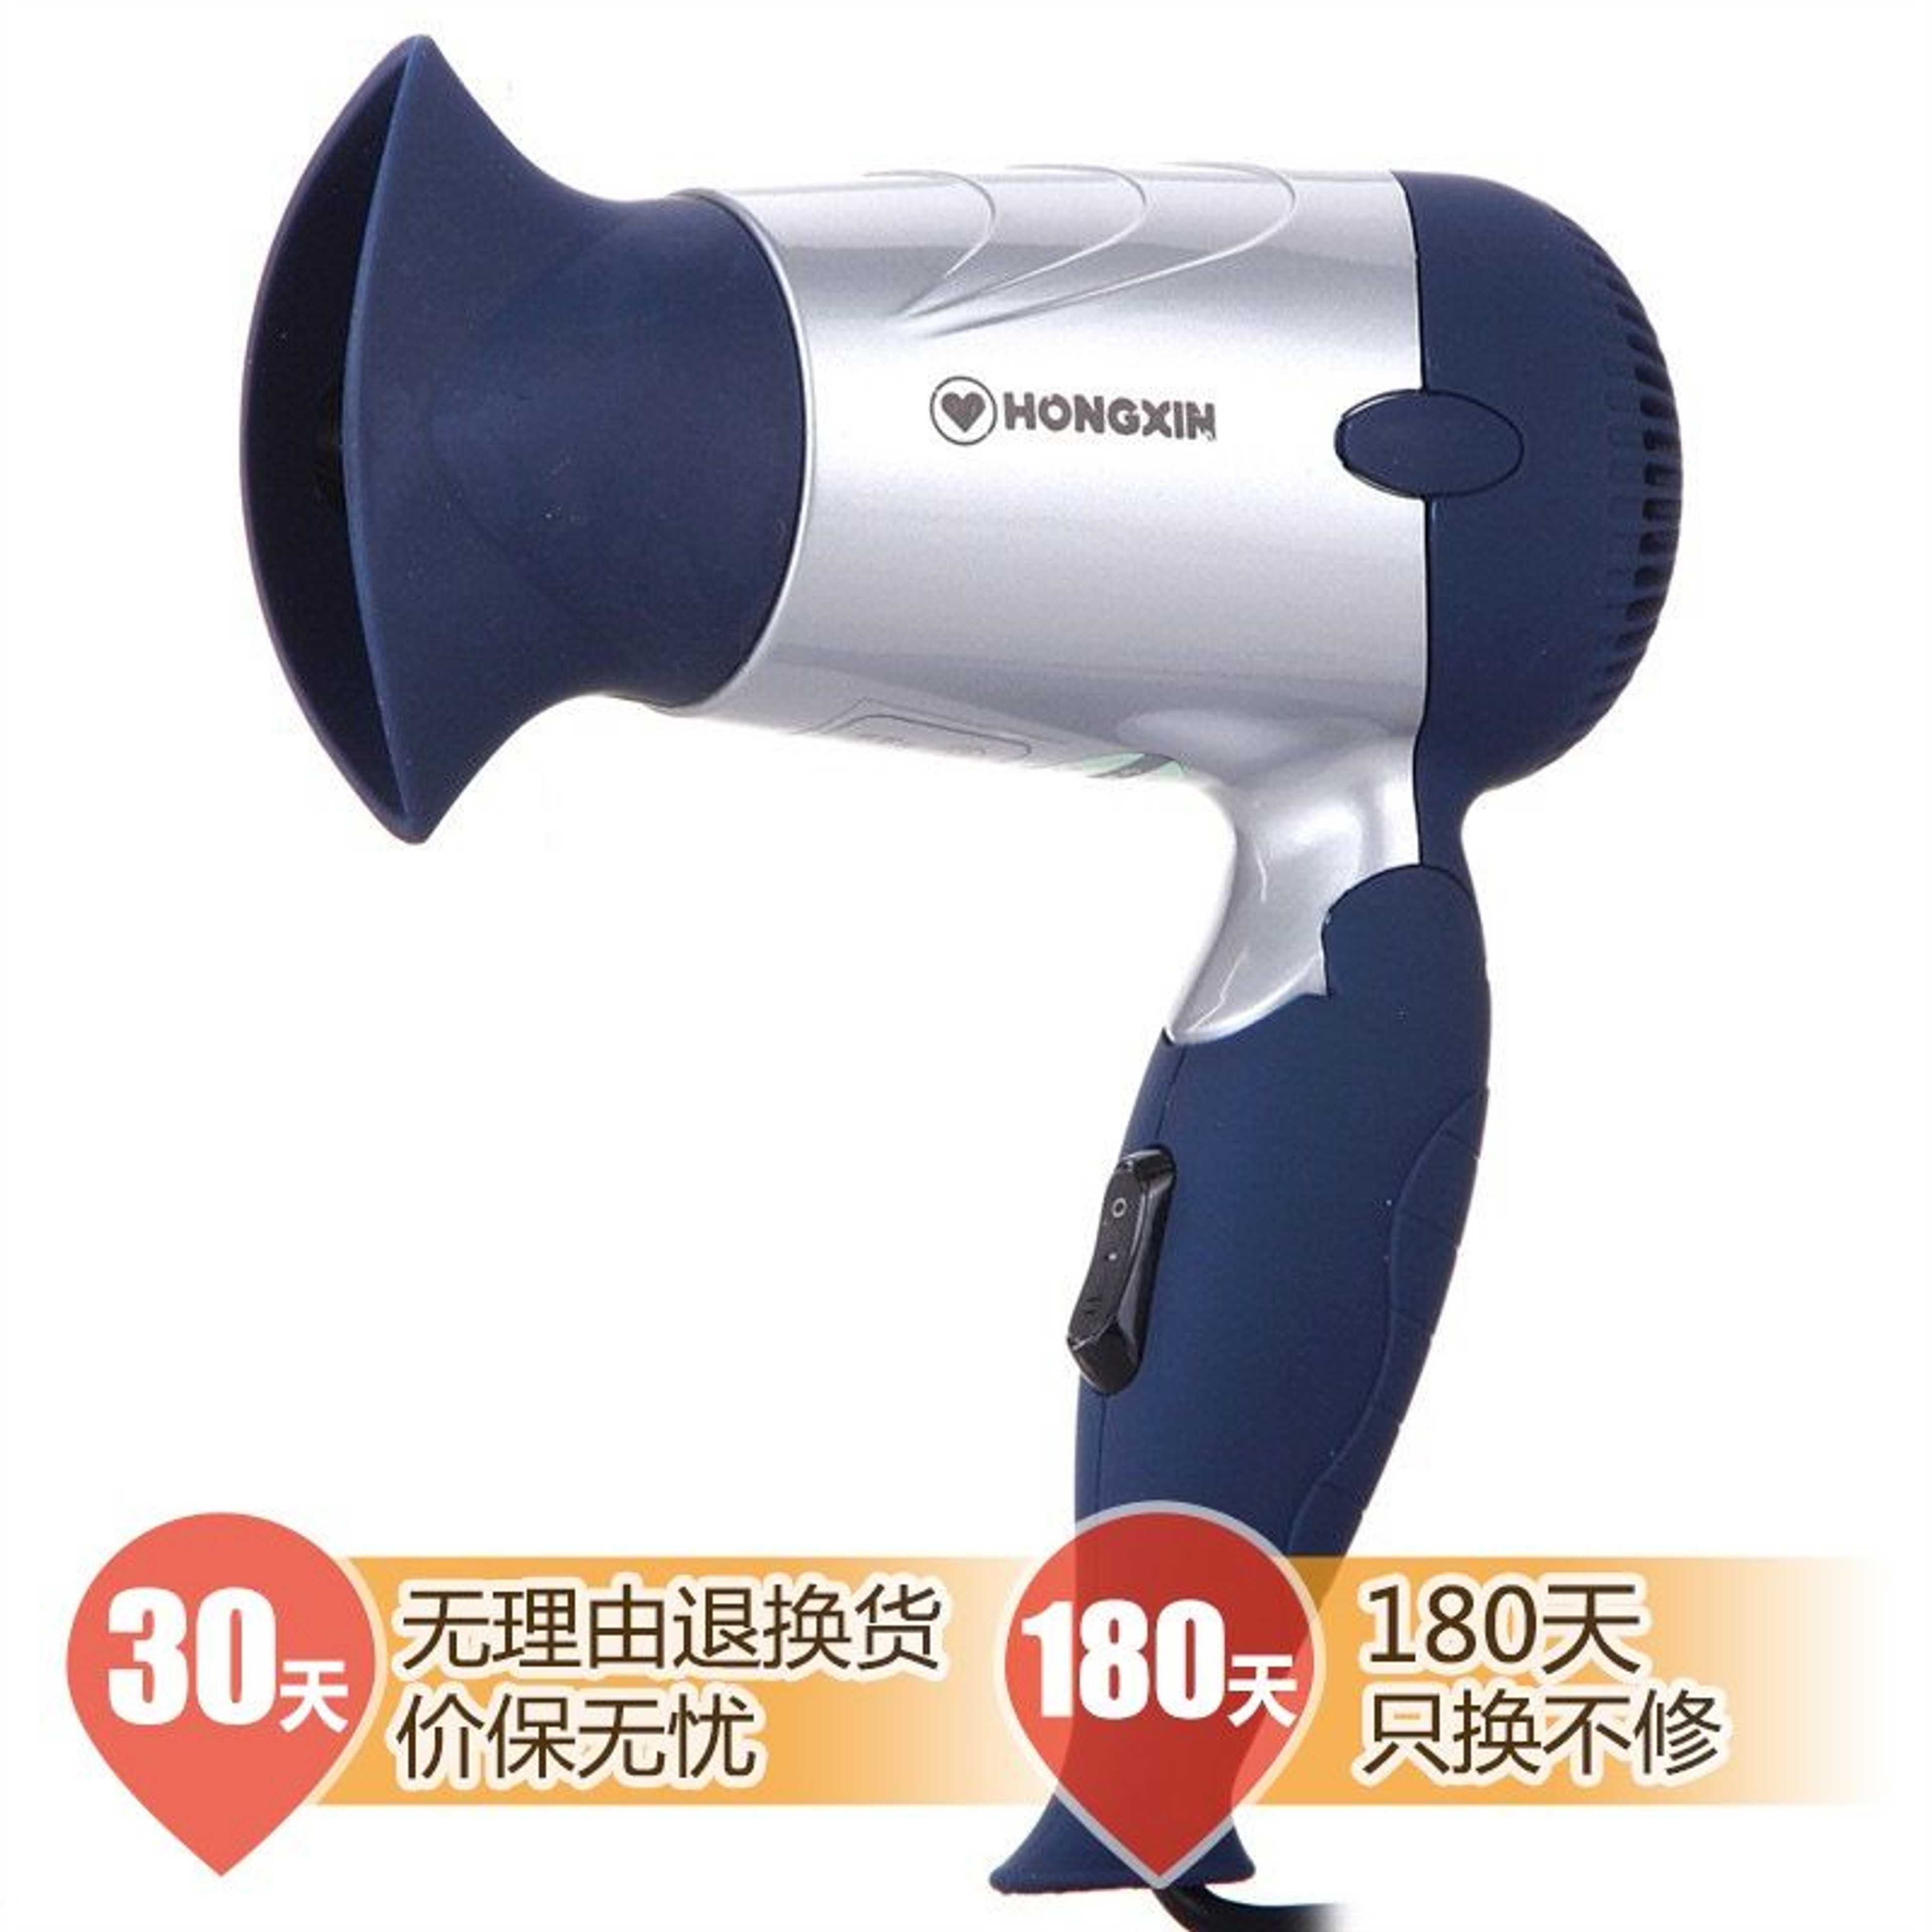 Anex Hair foldable orignal dryer (AG-7010) for Men and Women With 2 Years Brand Warranty